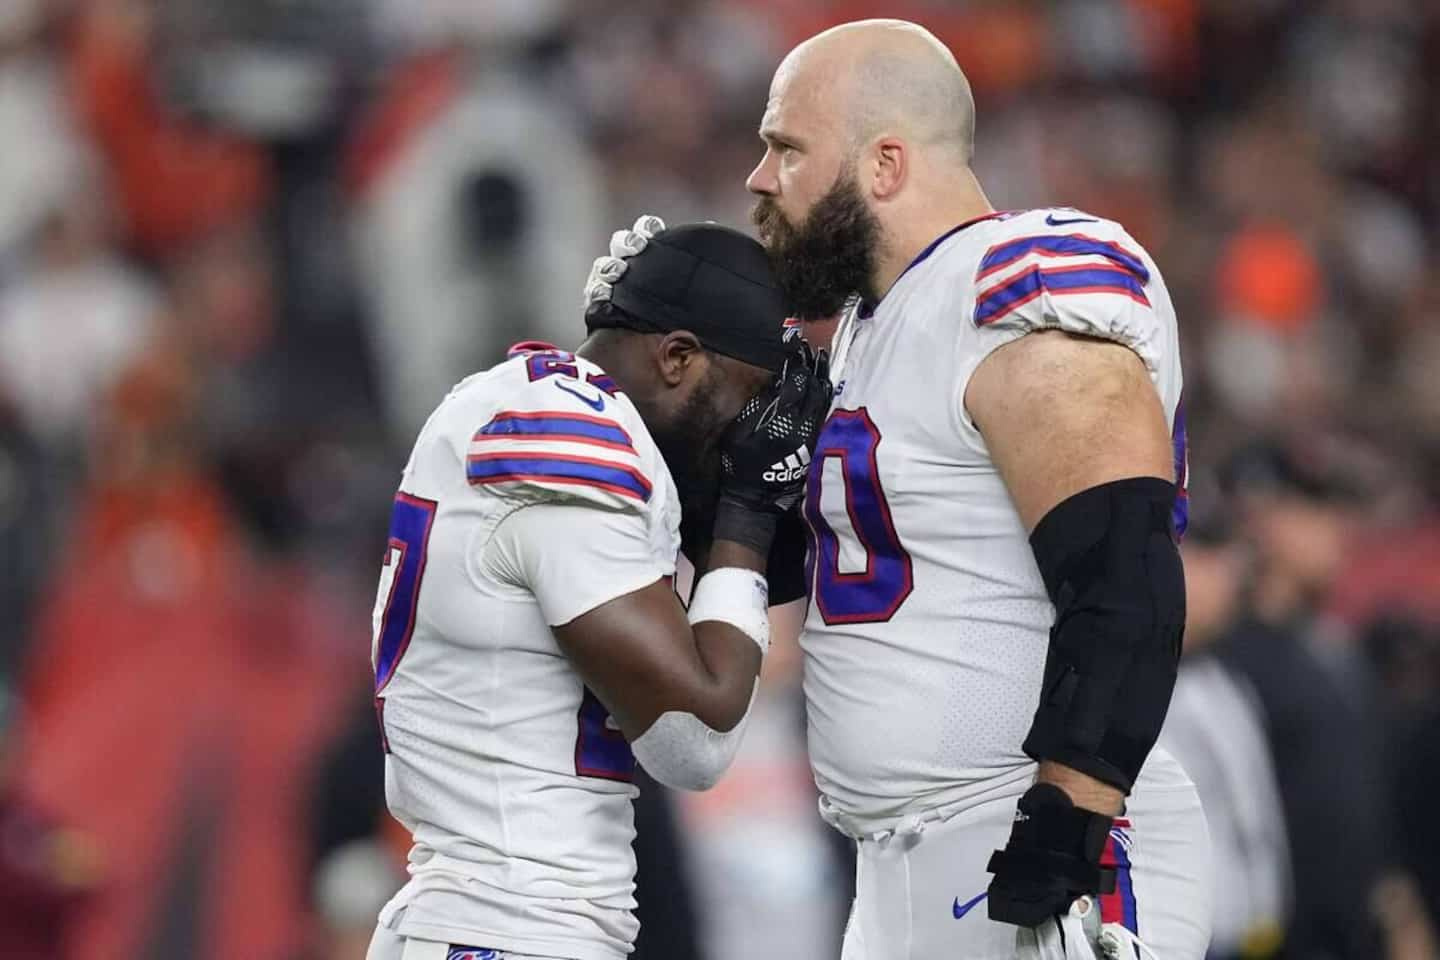 NFL: Bills player still in "critical condition" after shock during game